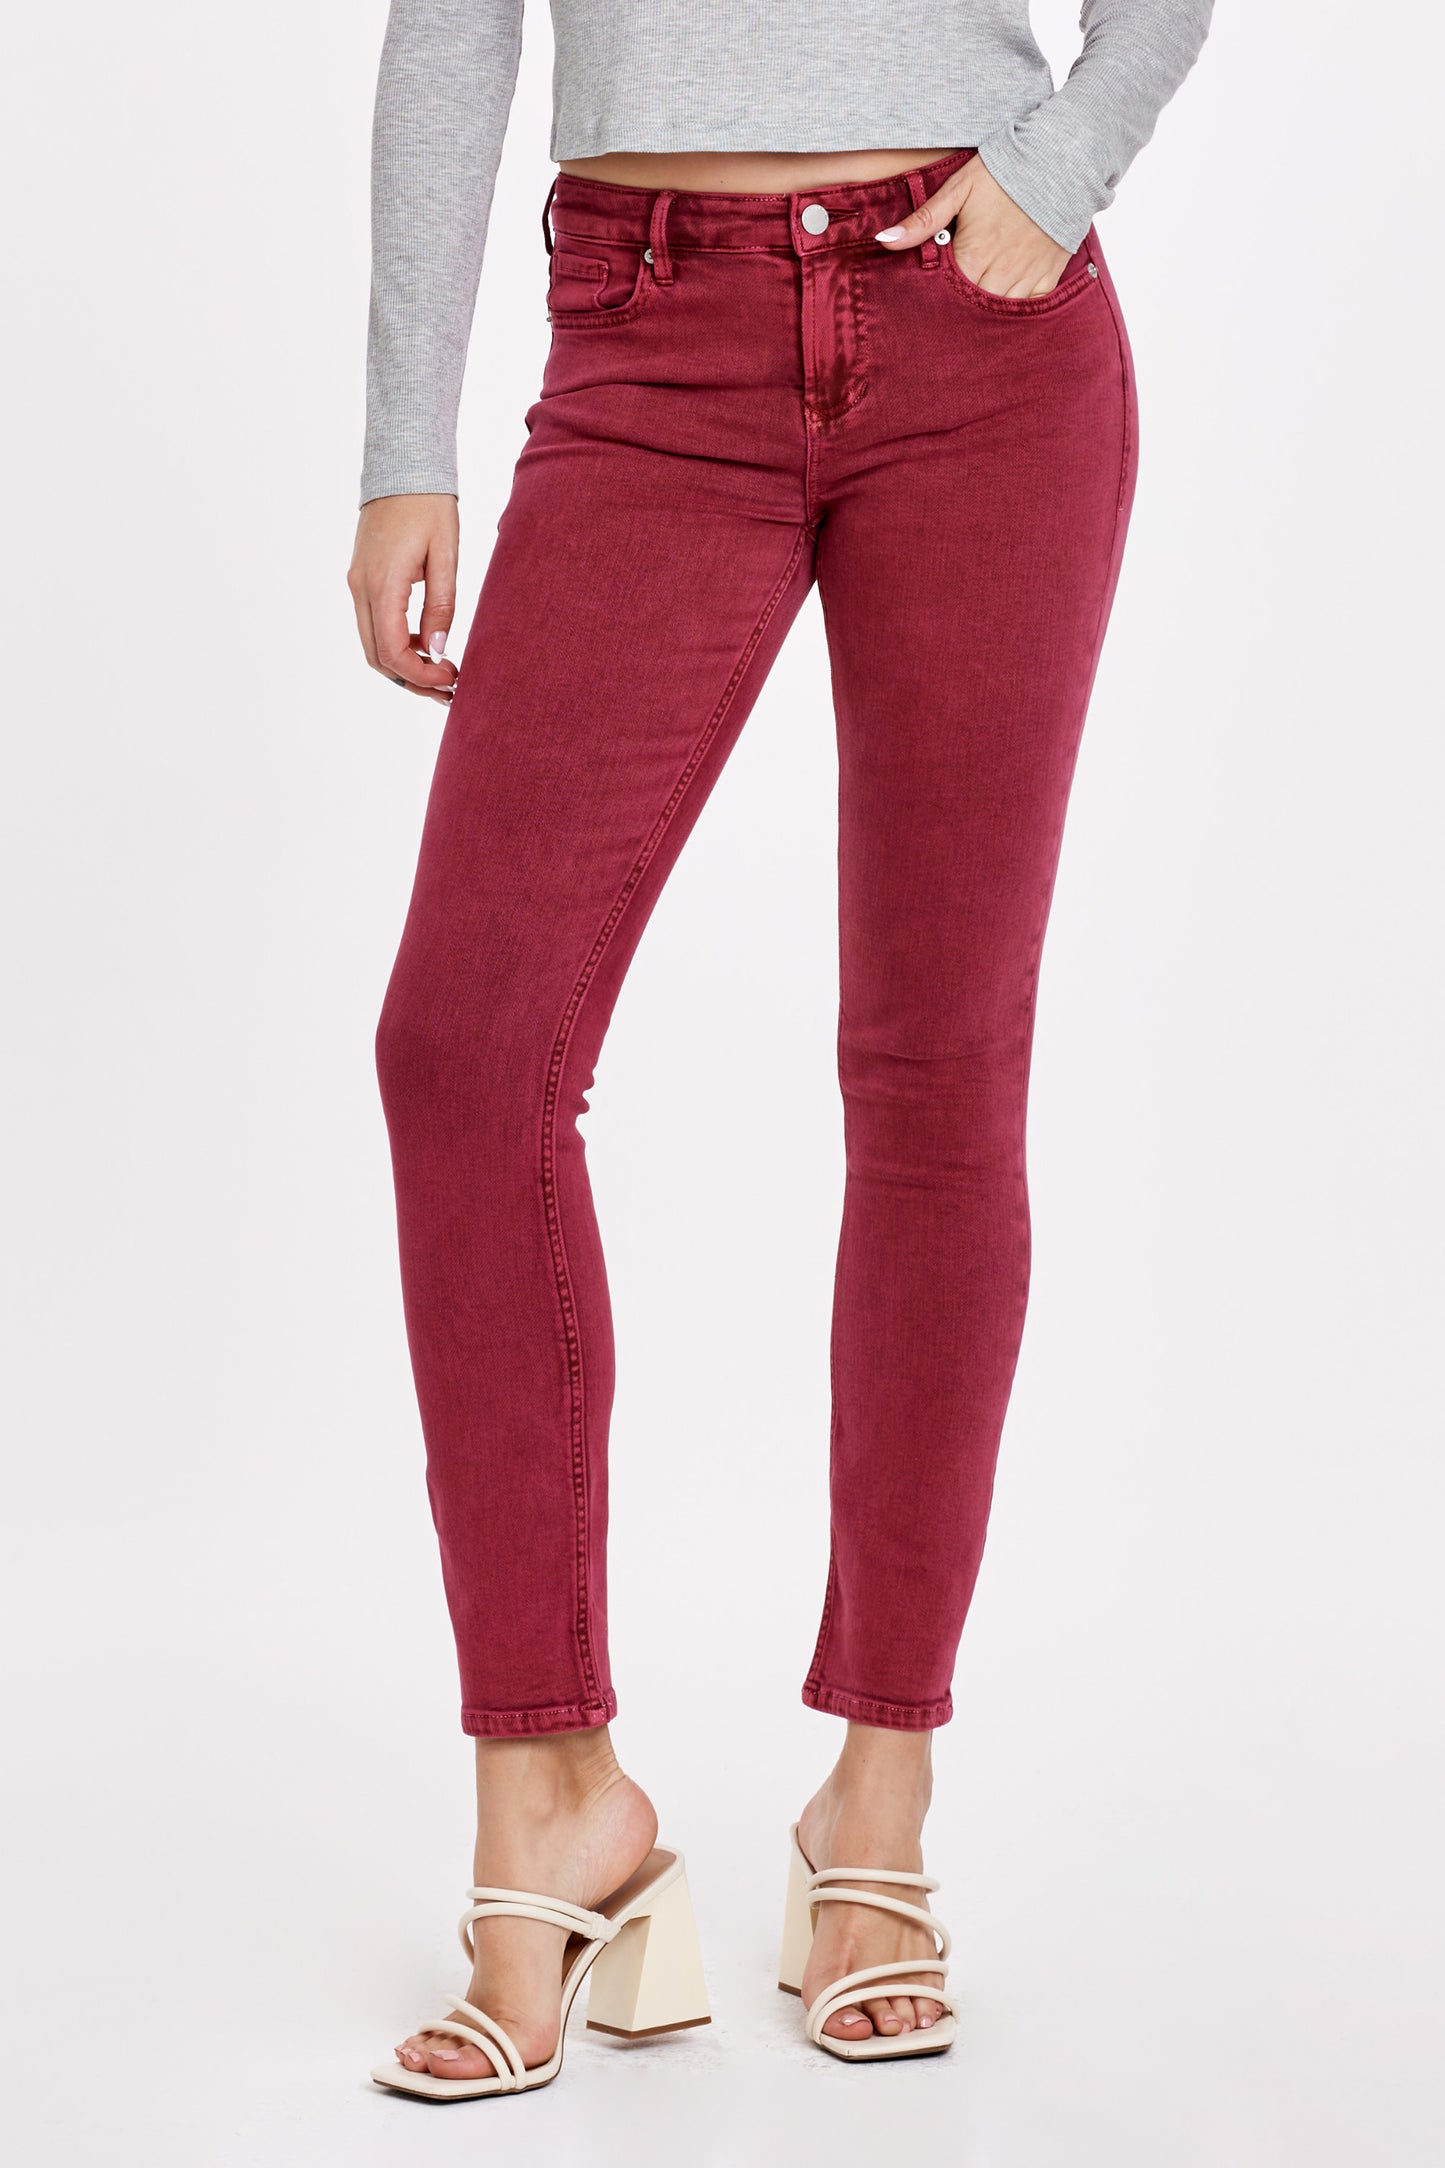 RUBY FALLS BLAIRE JEANS